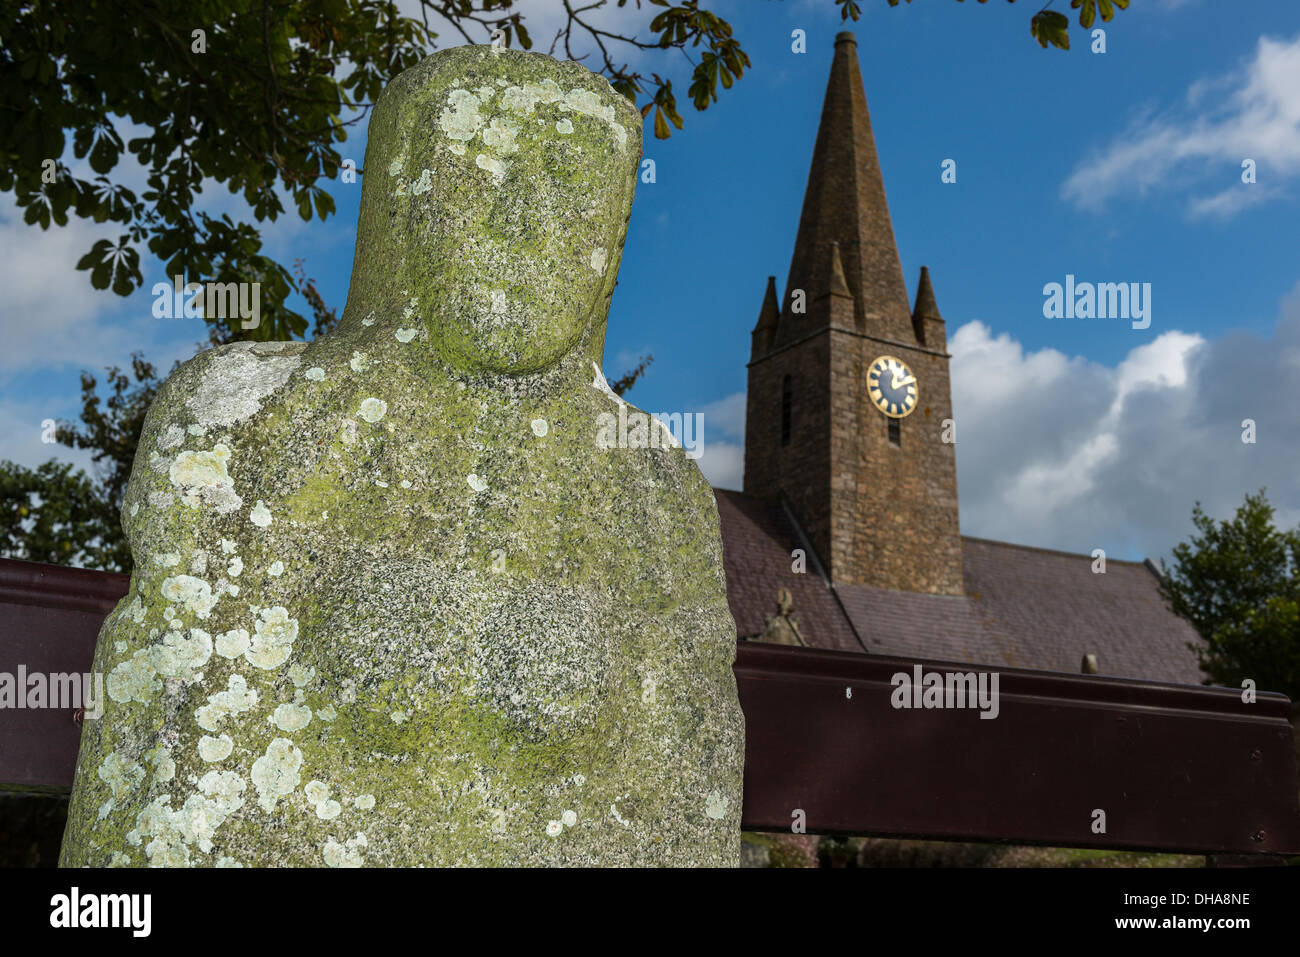 Gran' Mere du Chimquiere or Grand Mother of the Cemetery at St Martin's church, Guernsey, Channel Islands. Stock Photo